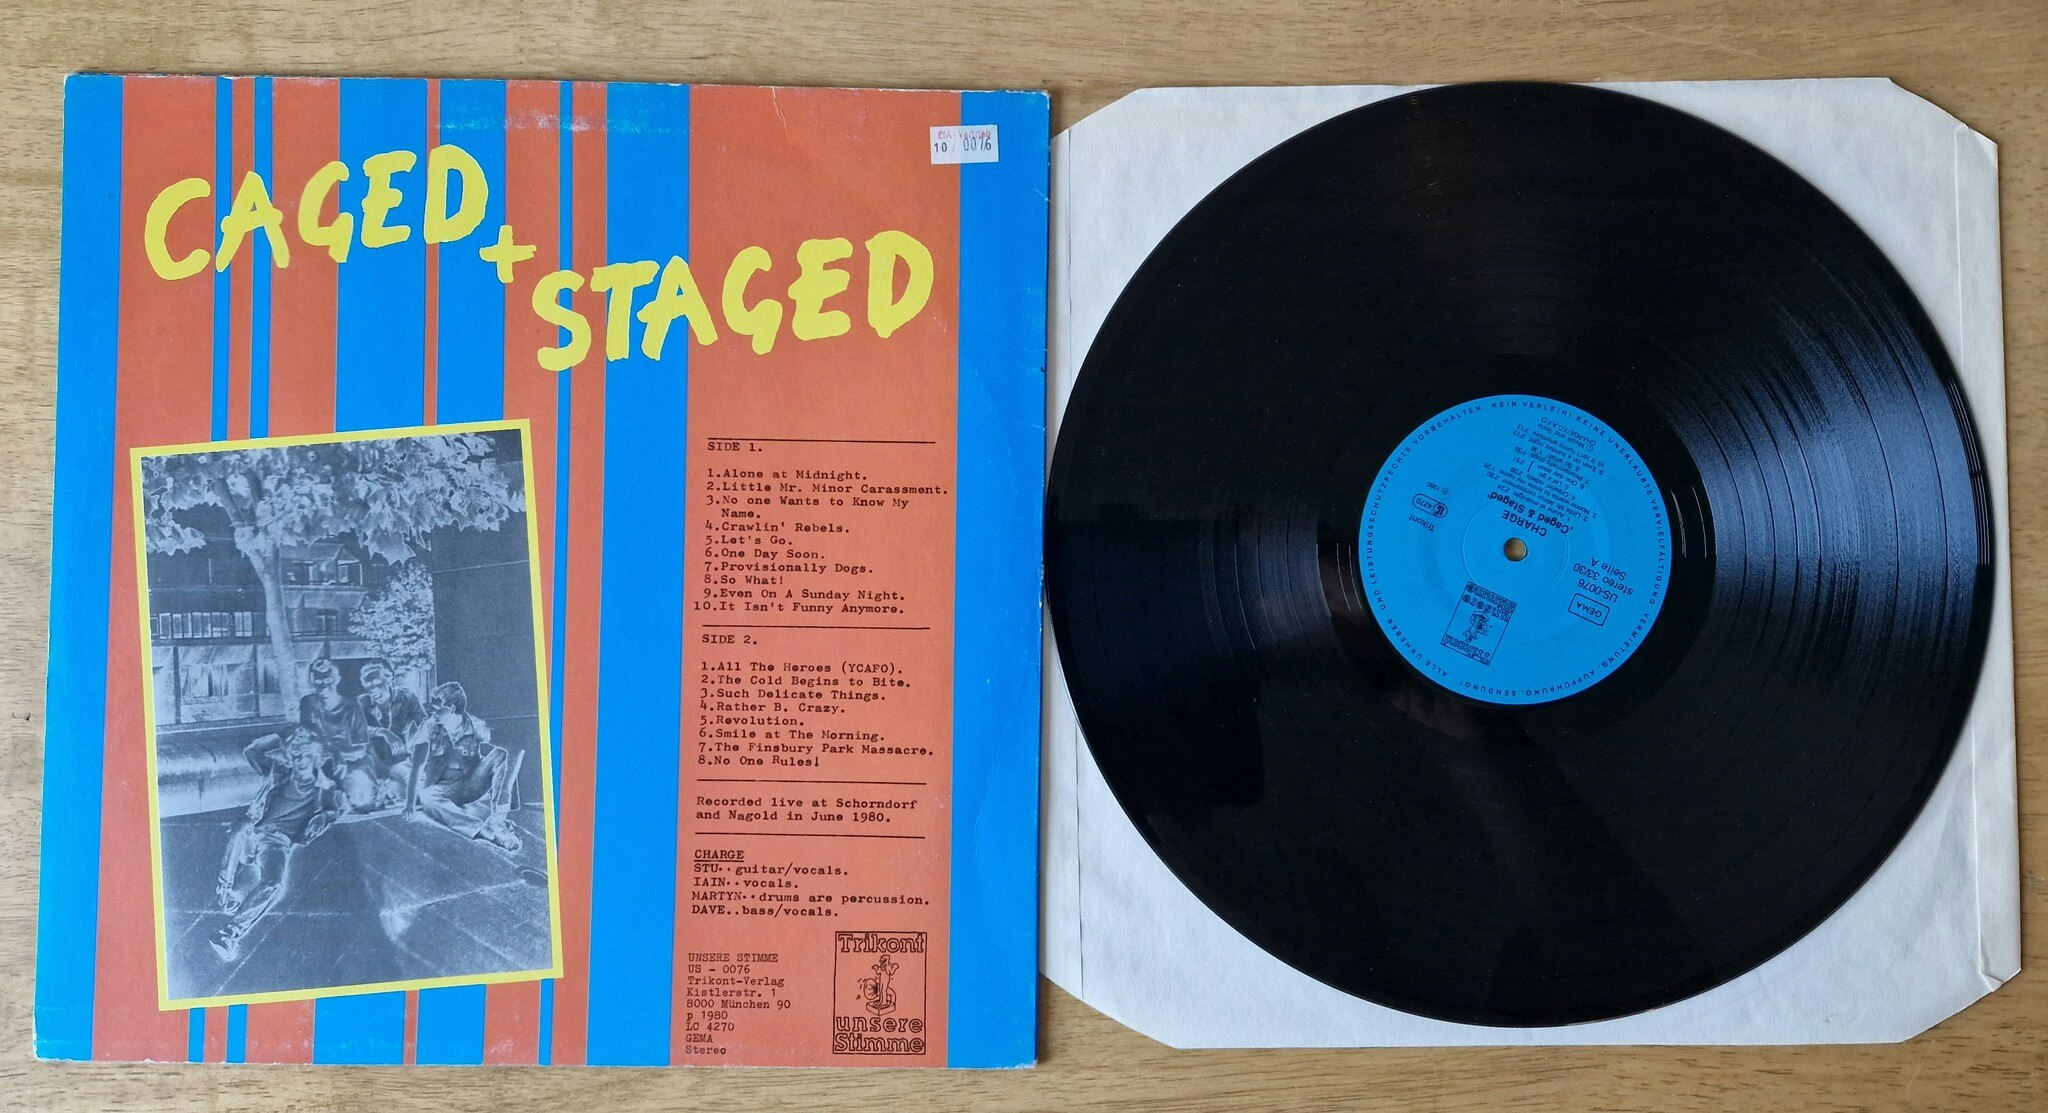 Charged, Caged & Staged. Vinyl LP